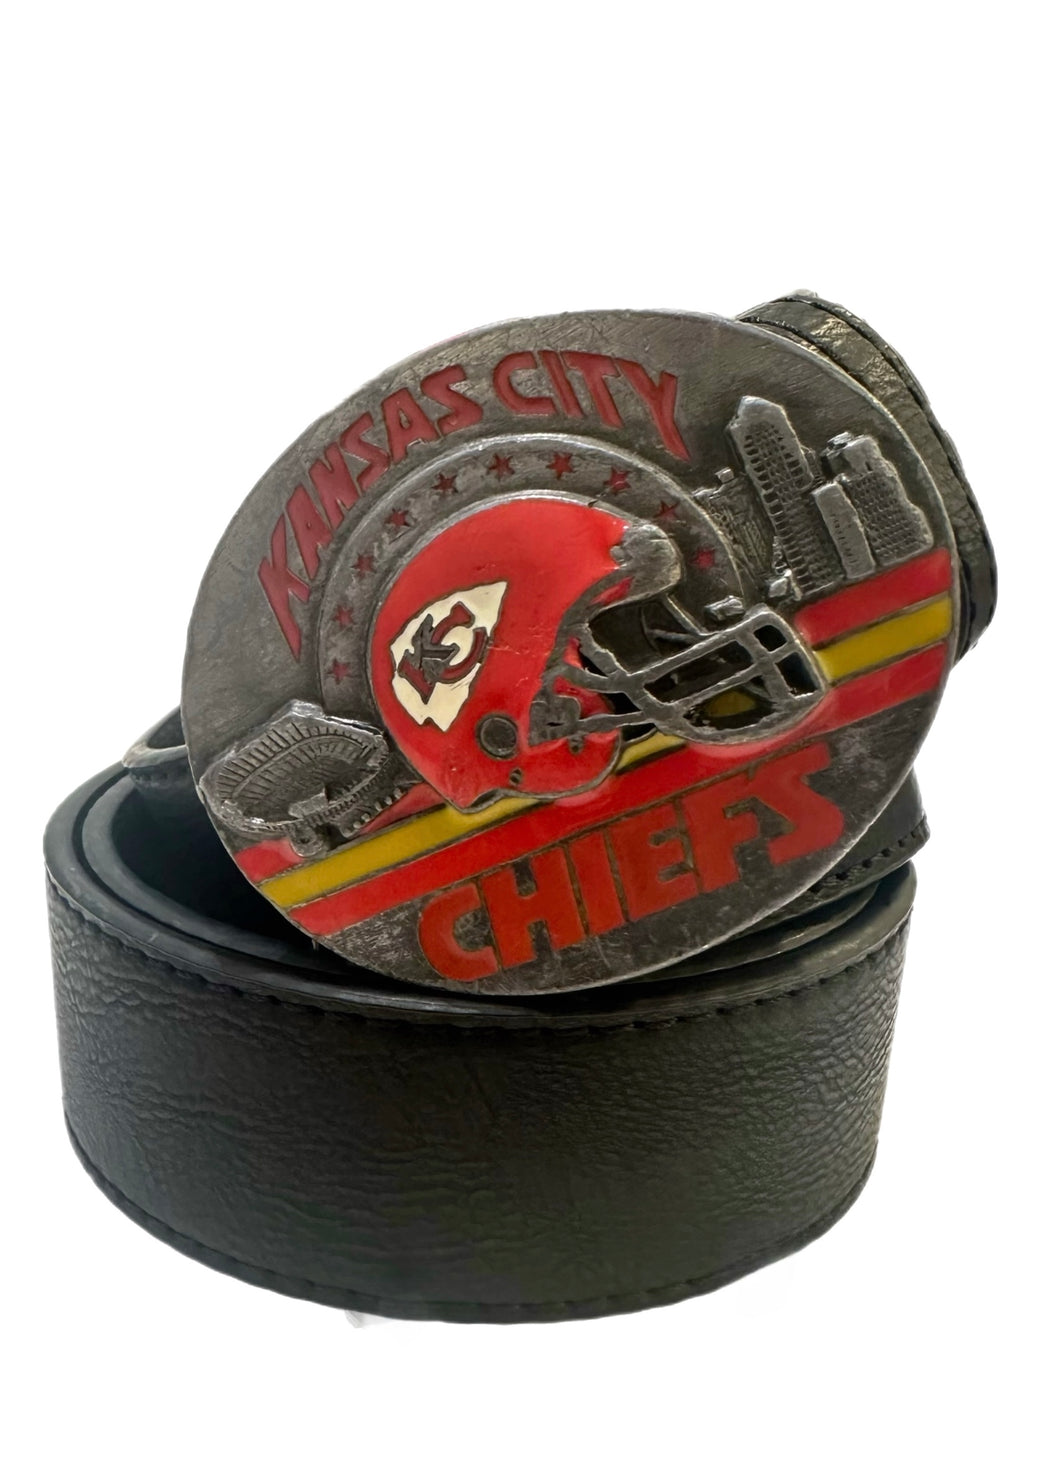 Kansas Chiefs, Football Vintage 1993 Belt Buckle with New Soft Leather Strap